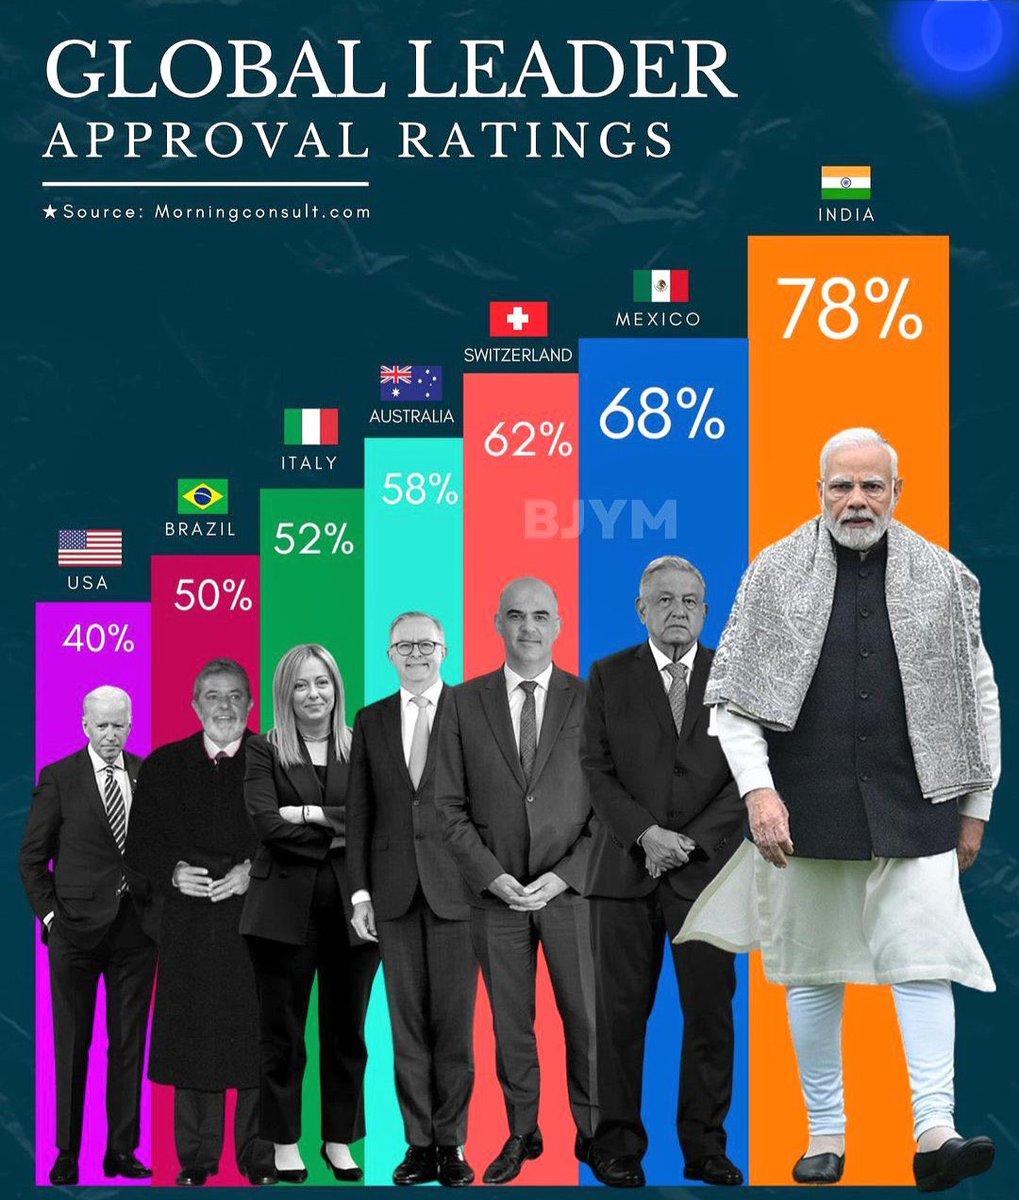 PM Modi Emerged as World's Most Popular Leader, with approval rating of 78%_40.1